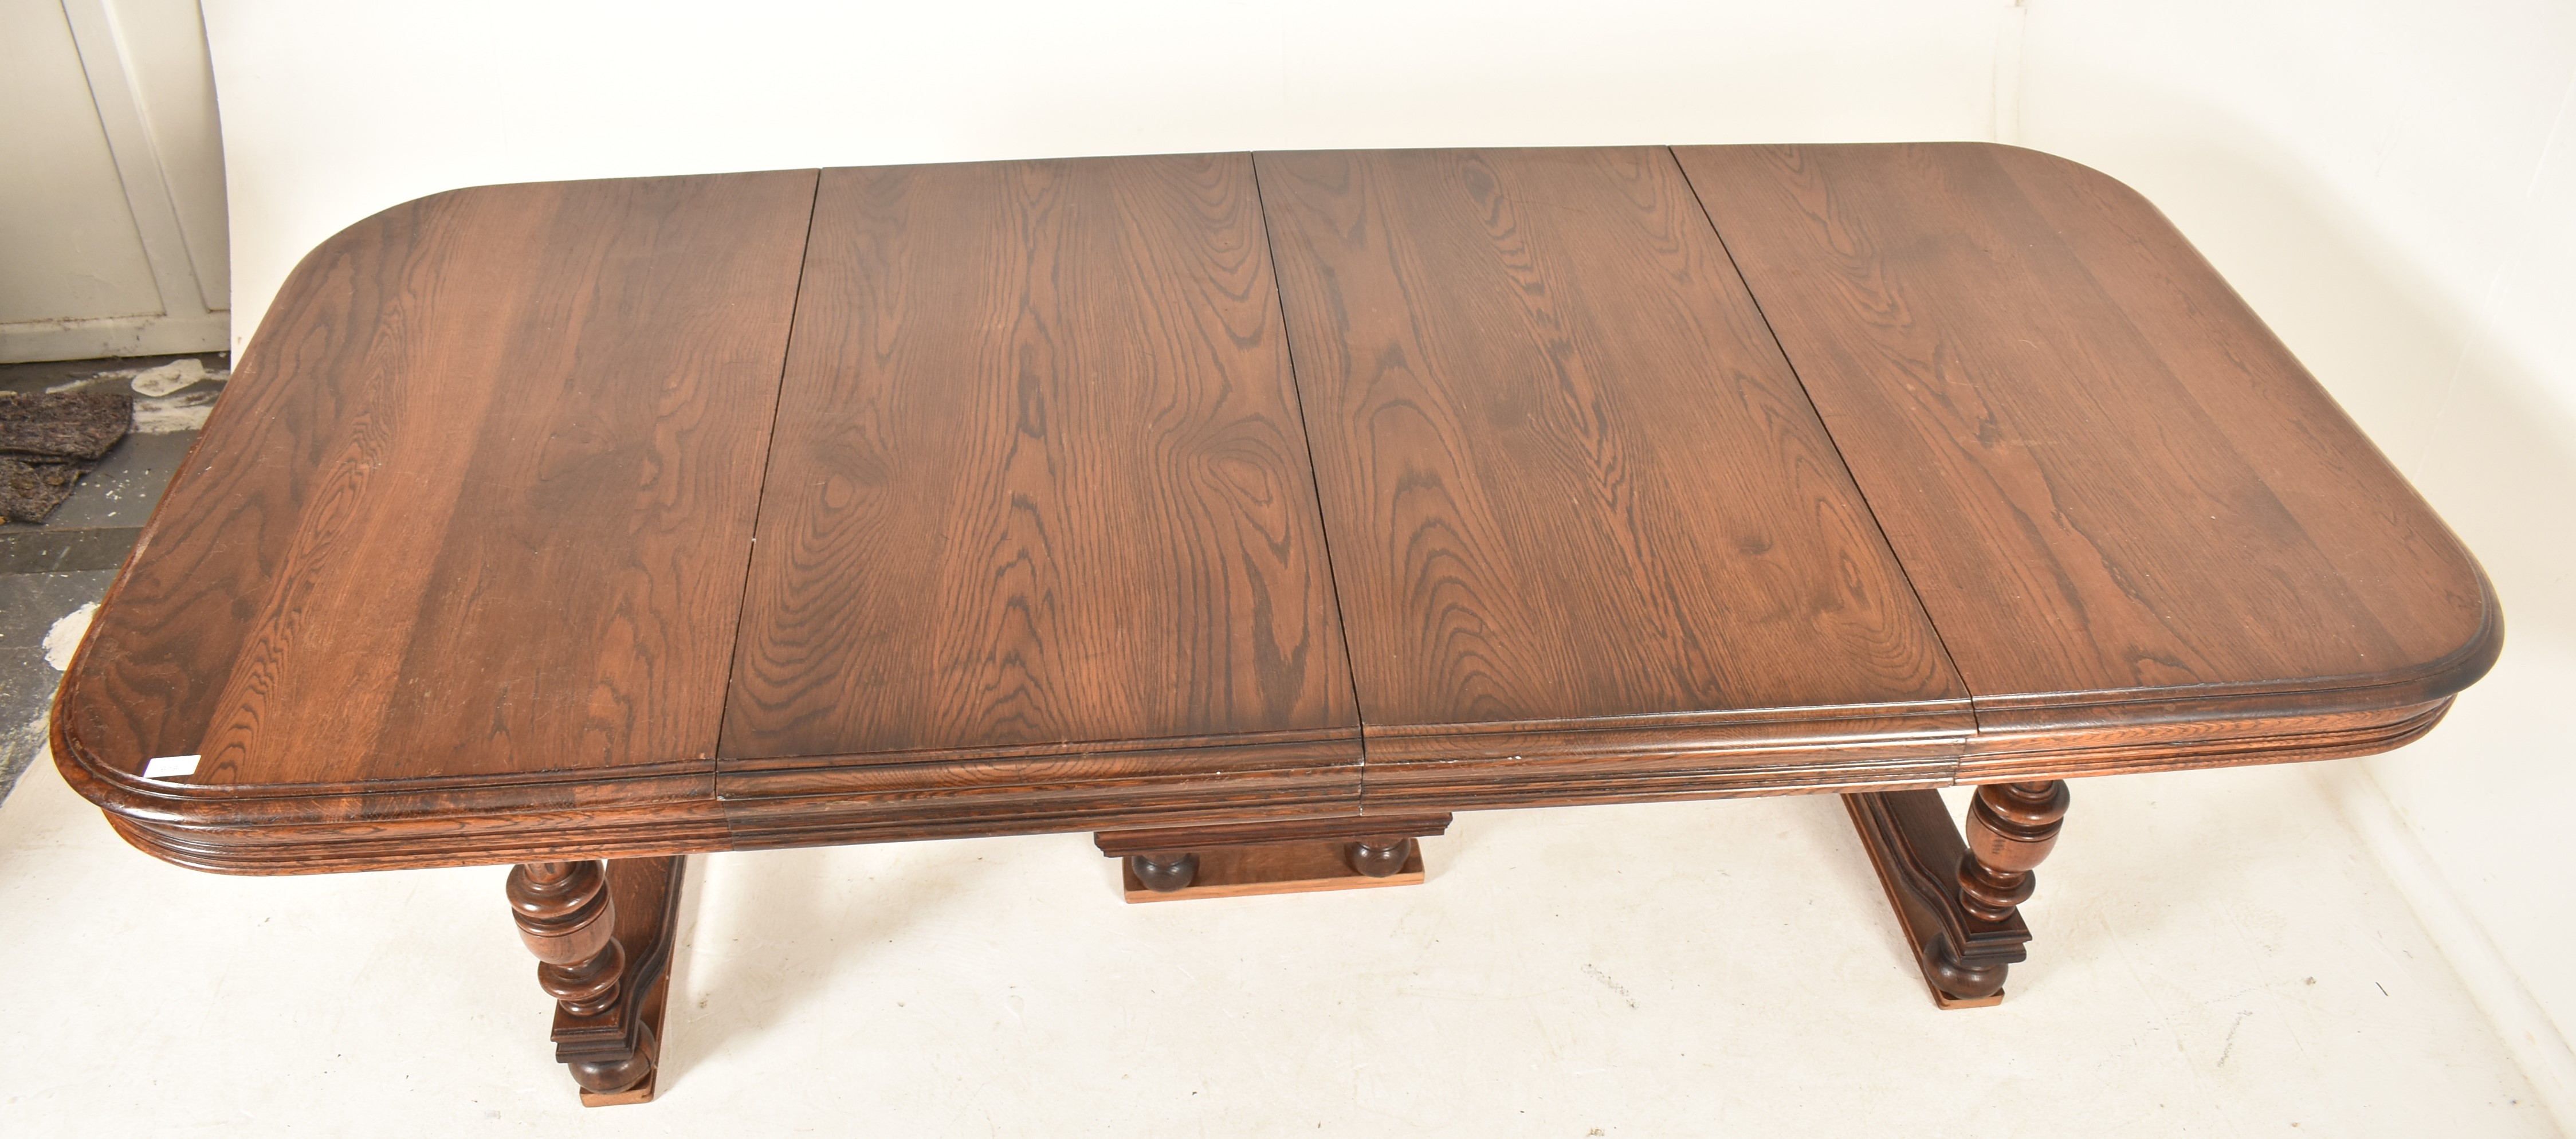 LATE 19TH CENTURY FRENCH OAK DRAW-LEAF DINING TABLE - Image 3 of 5